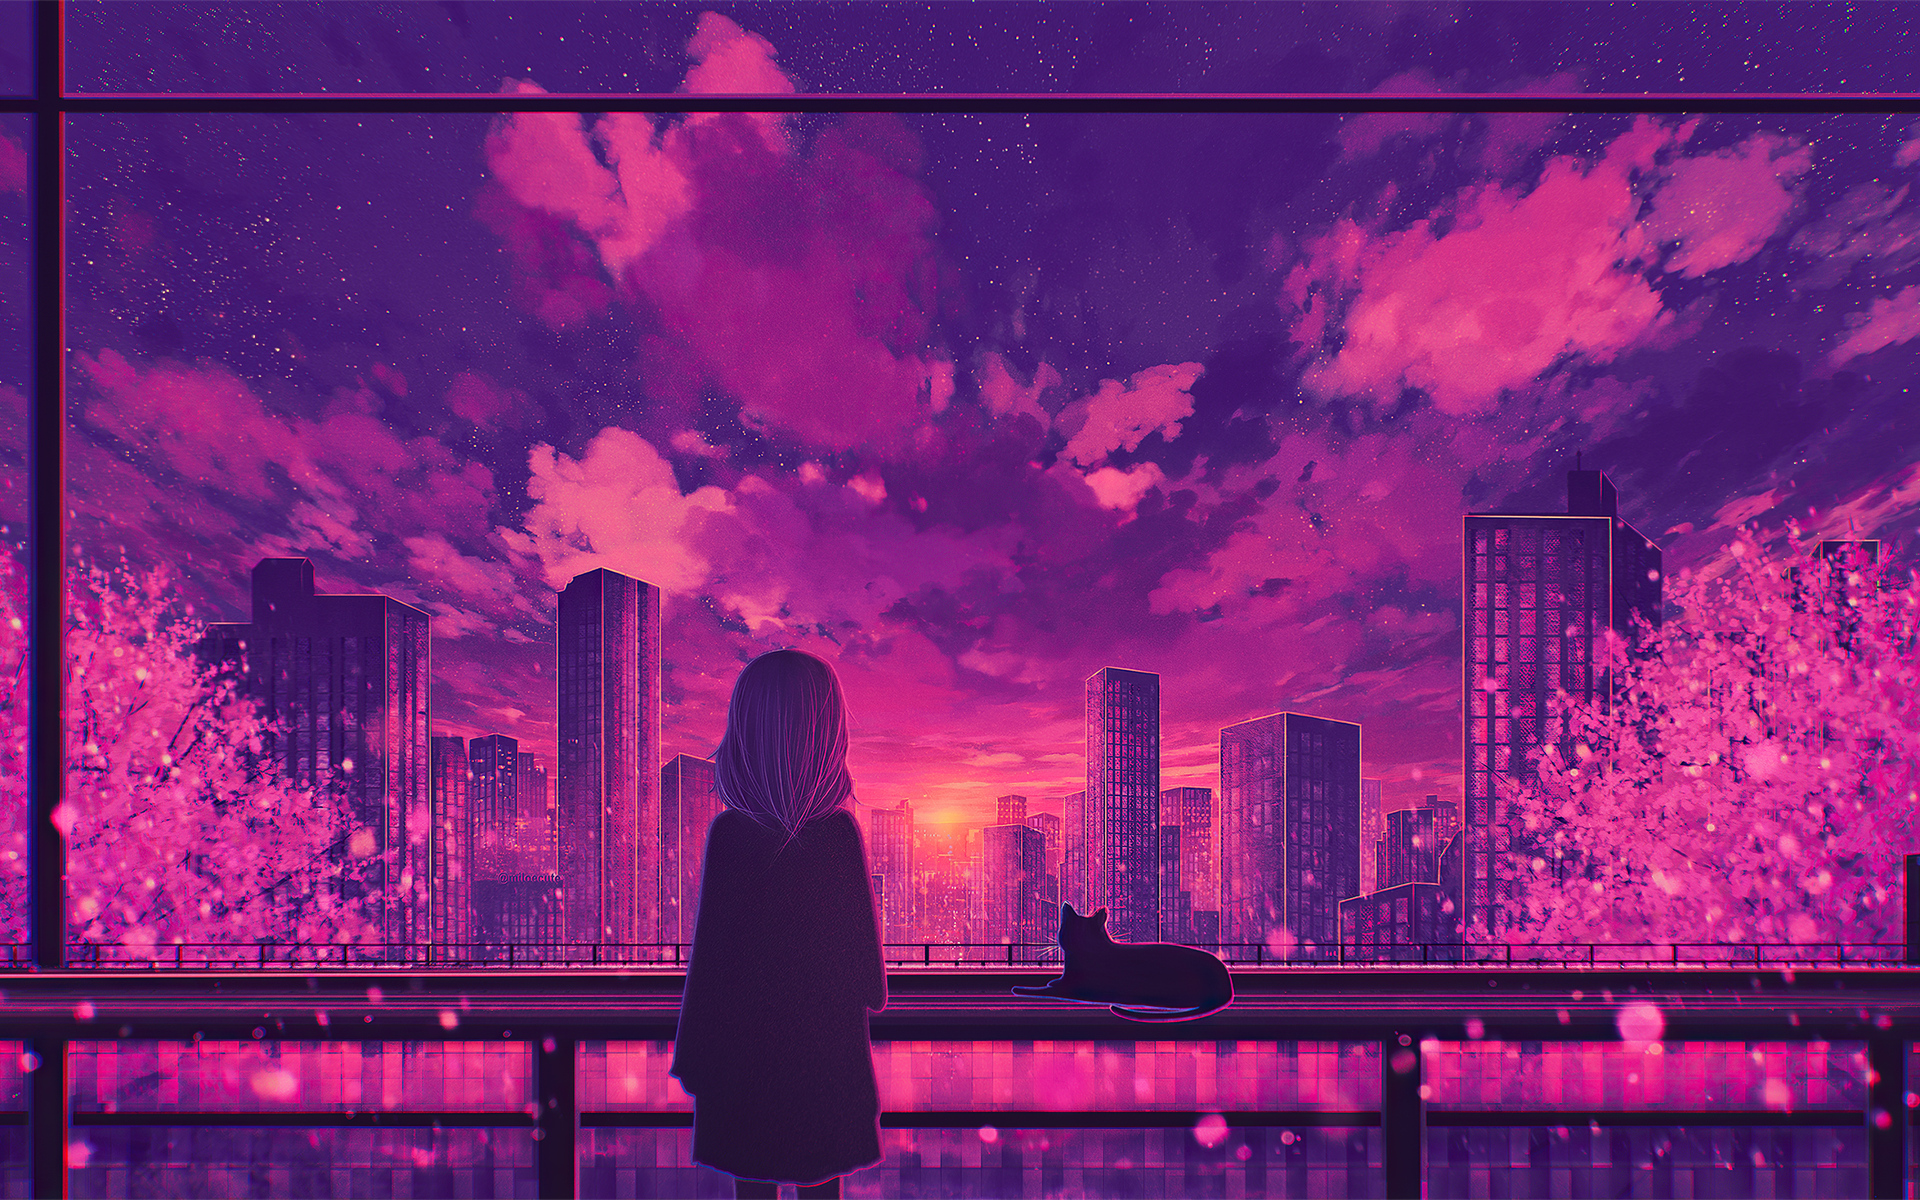 Anime Girls Evening Sunset Sunset Glow Cats City Clouds Building Cherry Blossom Trees Starry Night S 1920x1200